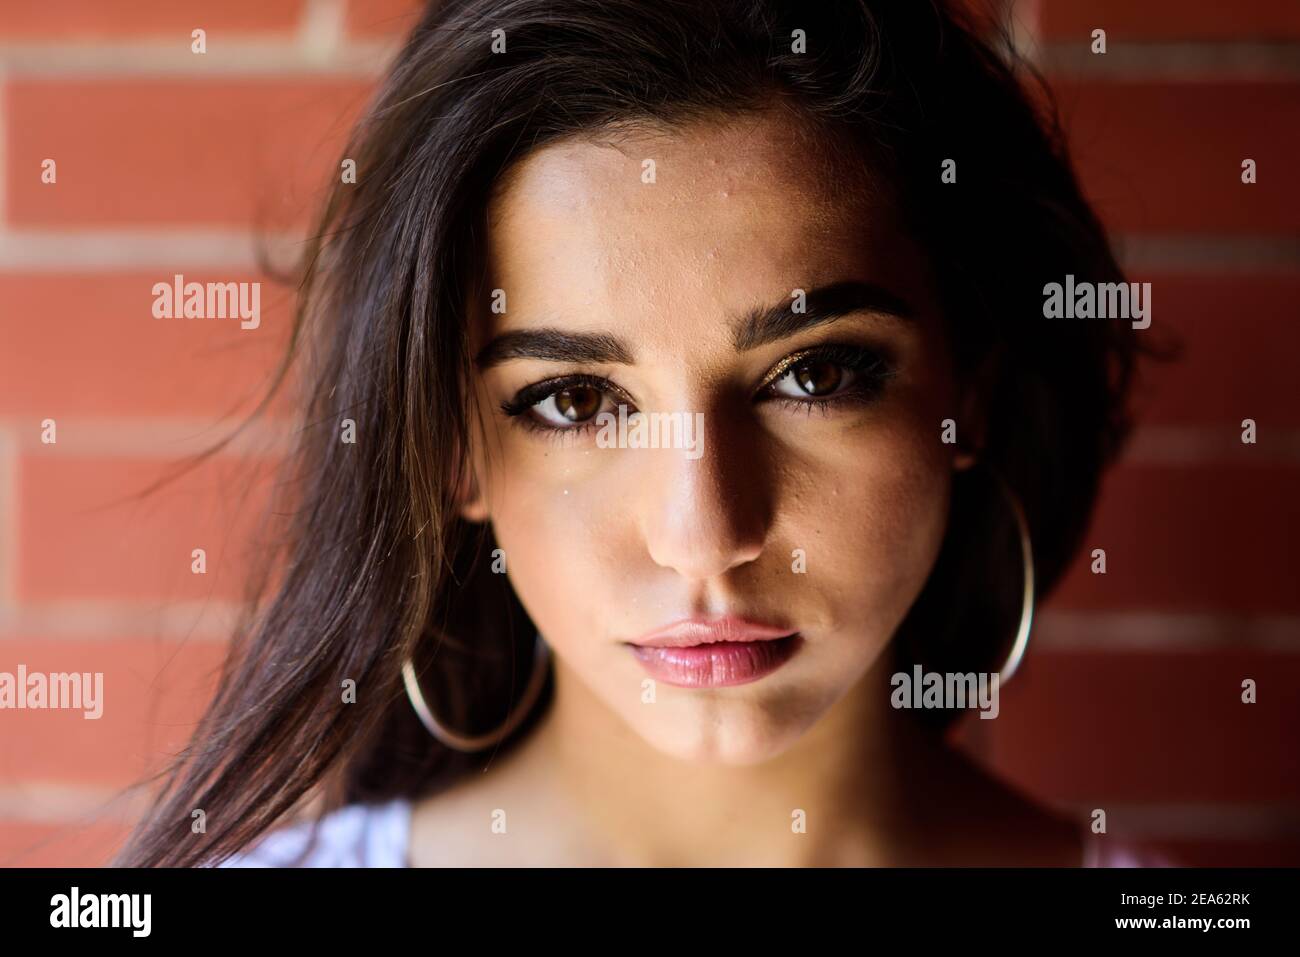 Girl attractive gorgeous brunette middle eastern appearance close up. Girl wears big metallic ring earrings accessory. Woman calm confident face with make up looks at camera. Beauty of arabian women. Stock Photo